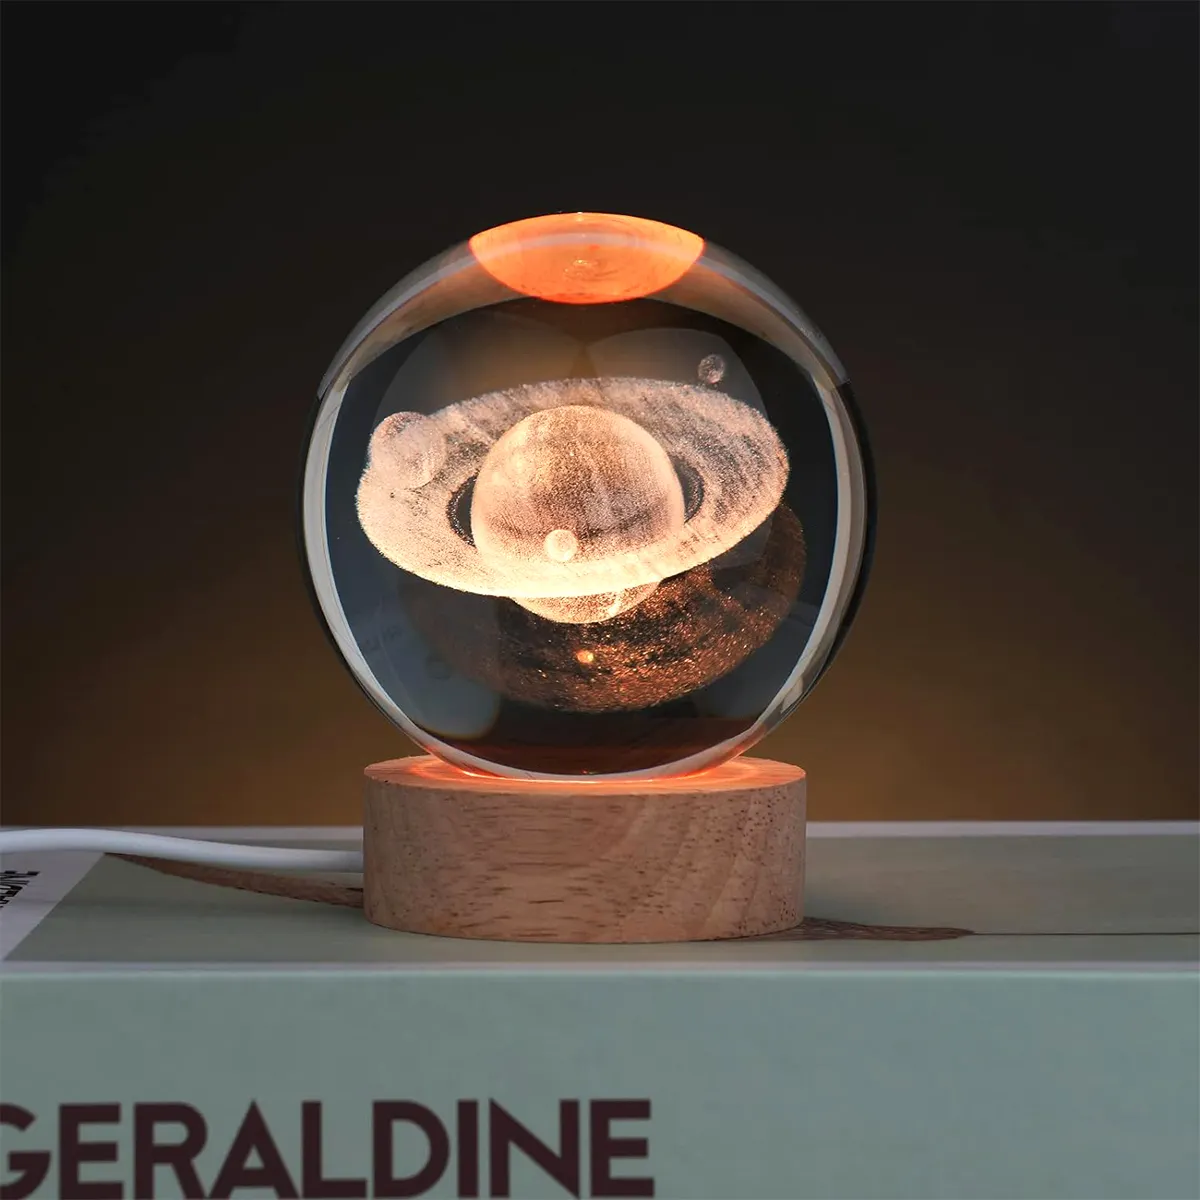 New 3D Carved Crystal Ball Night Light LED Min Glass Ball with Wooden Base Ornaments Birthday Christmas Memorial Gifts